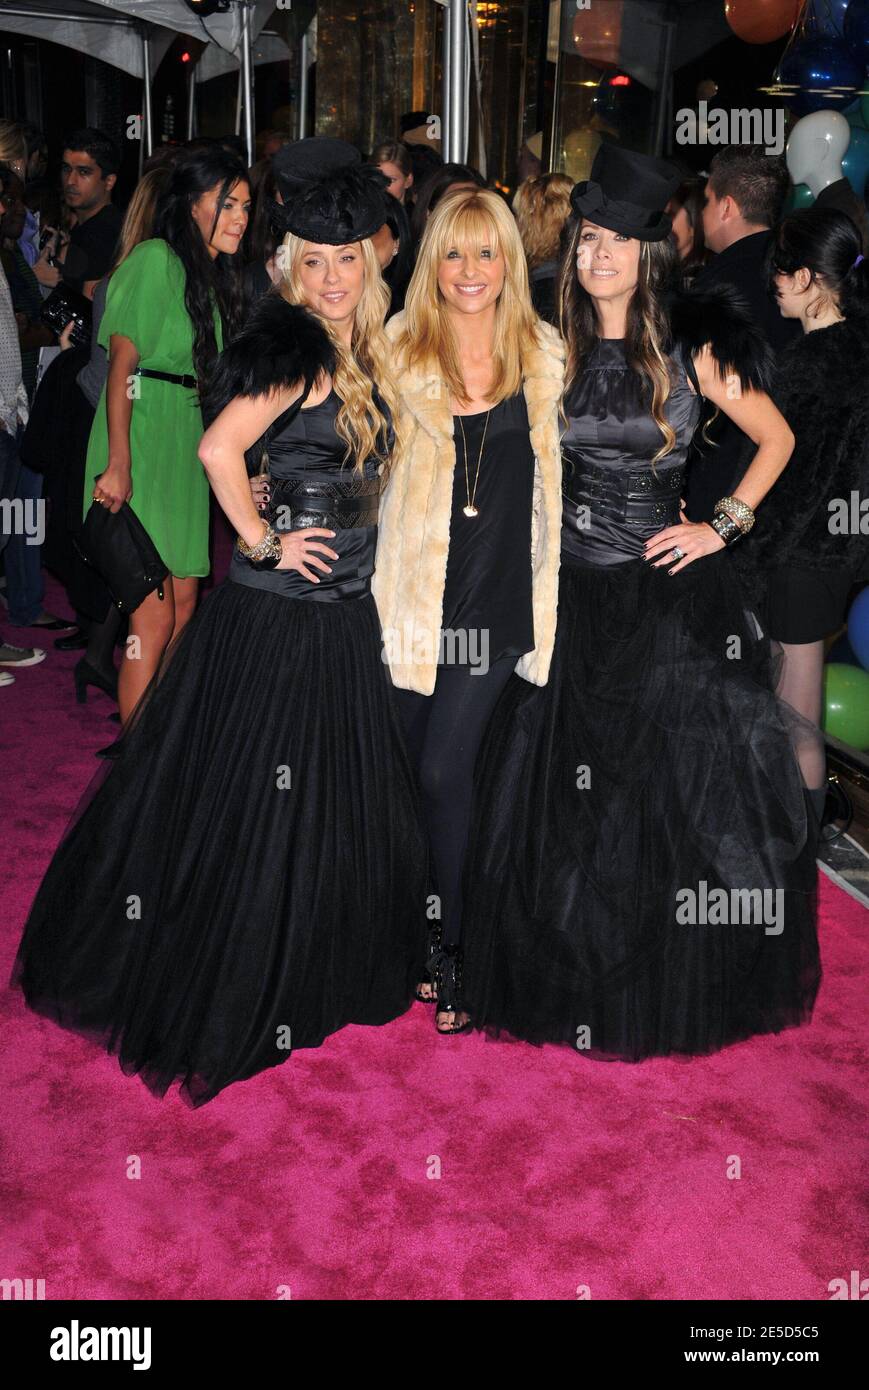 L-R Pamela Skaist-Levy, actress Sarah Michelle Gellar and Gela Nash-Taylor attending the Juicy Couture Flagship opening party held at the Juicy Couture NYC flagship in New York City, USA on November 6, 2008. Photo by Gregorio Binuya/ABACAPRESS.COM Stock Photo